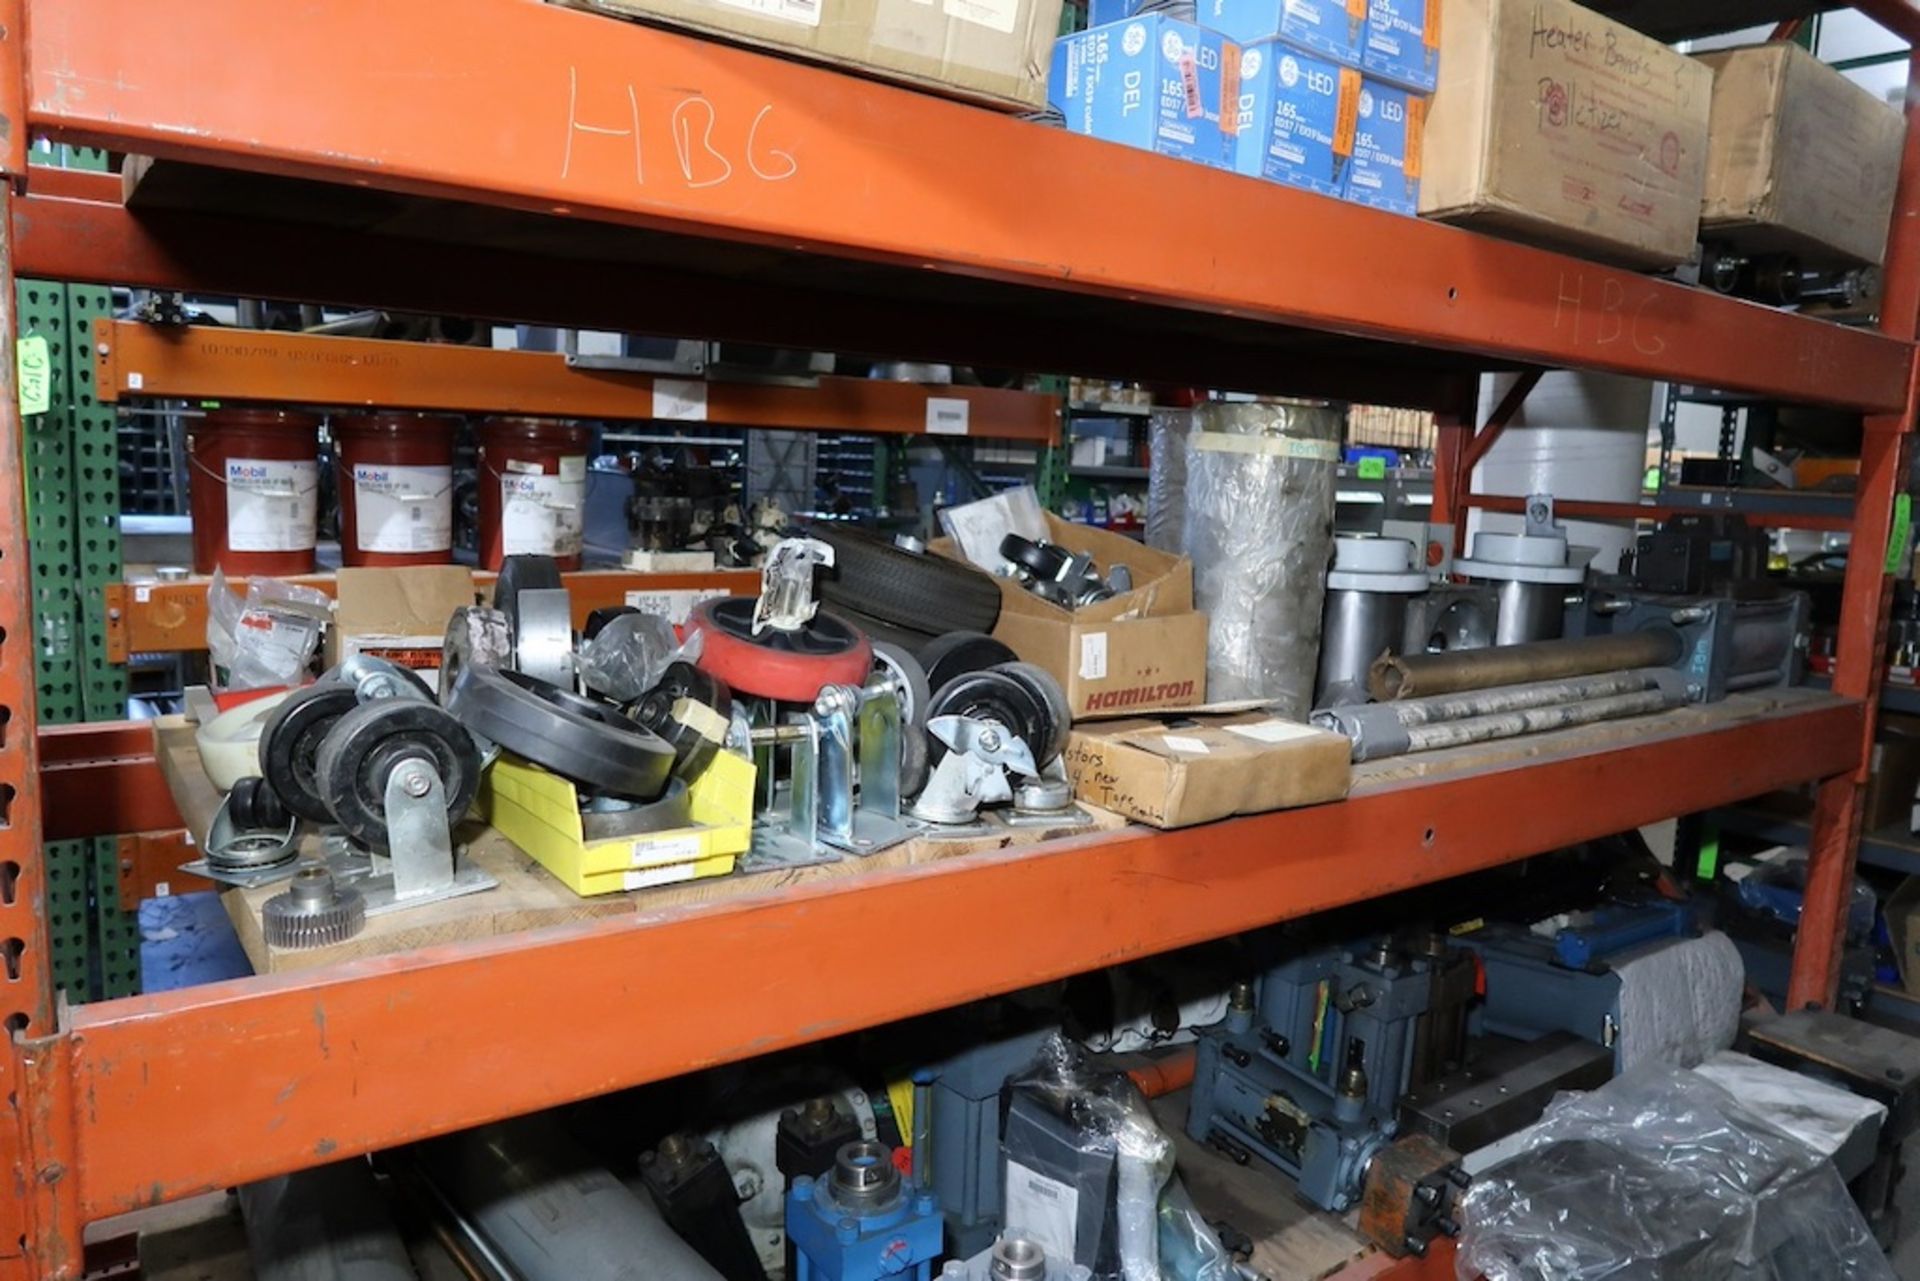 (1) Section of Pallet Racking with Assorted Spare Parts, Hydraulic Pumps, Heat Exchangers, Etc. - Image 17 of 18